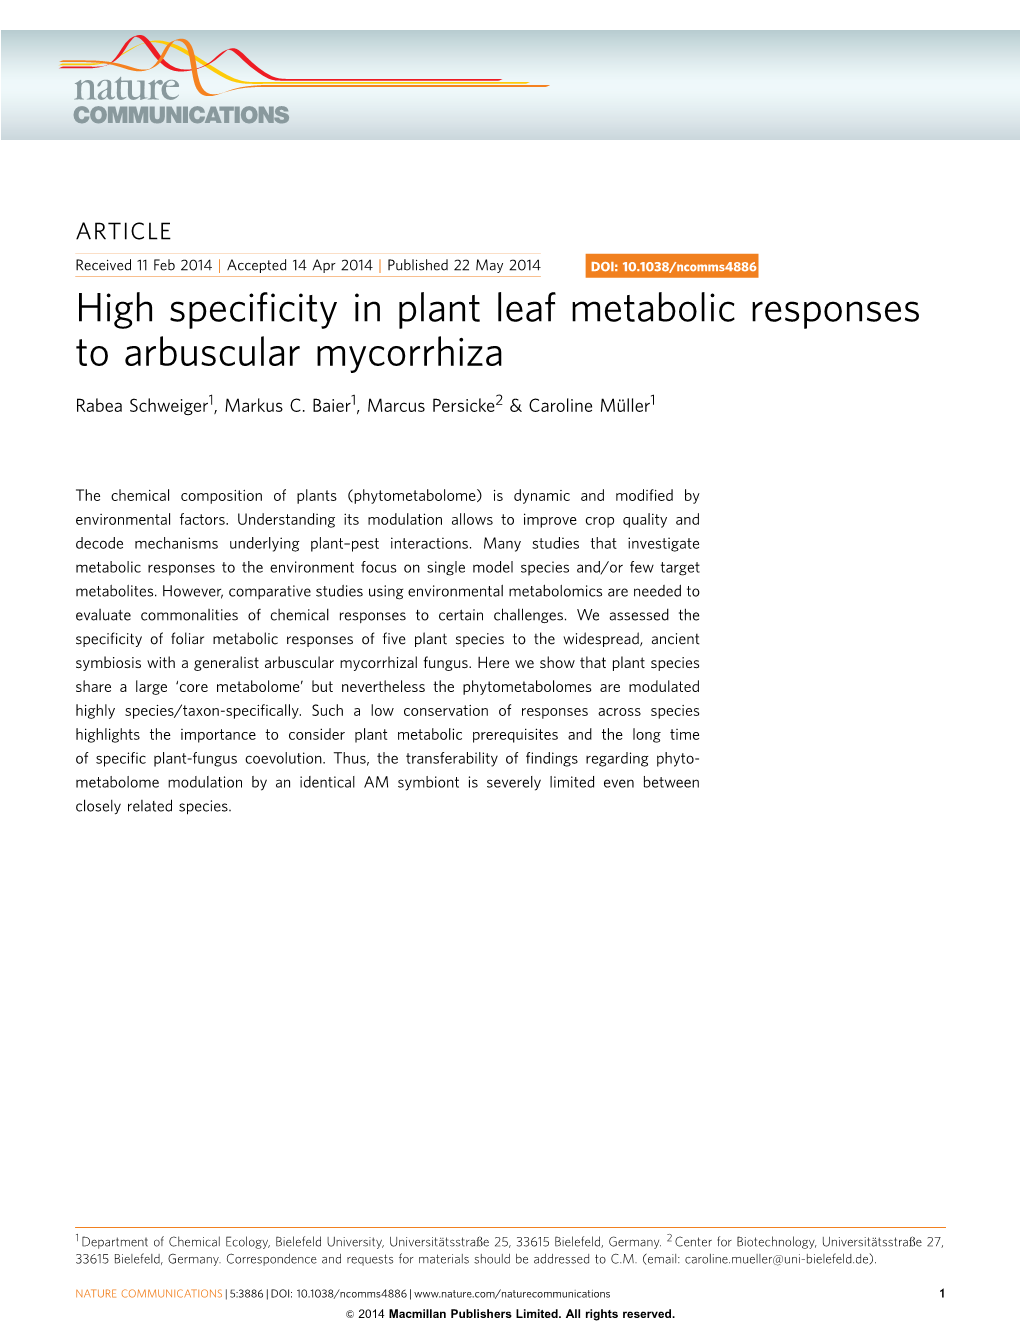 High Specificity in Plant Leaf Metabolic Responses to Arbuscular Mycorrhiza